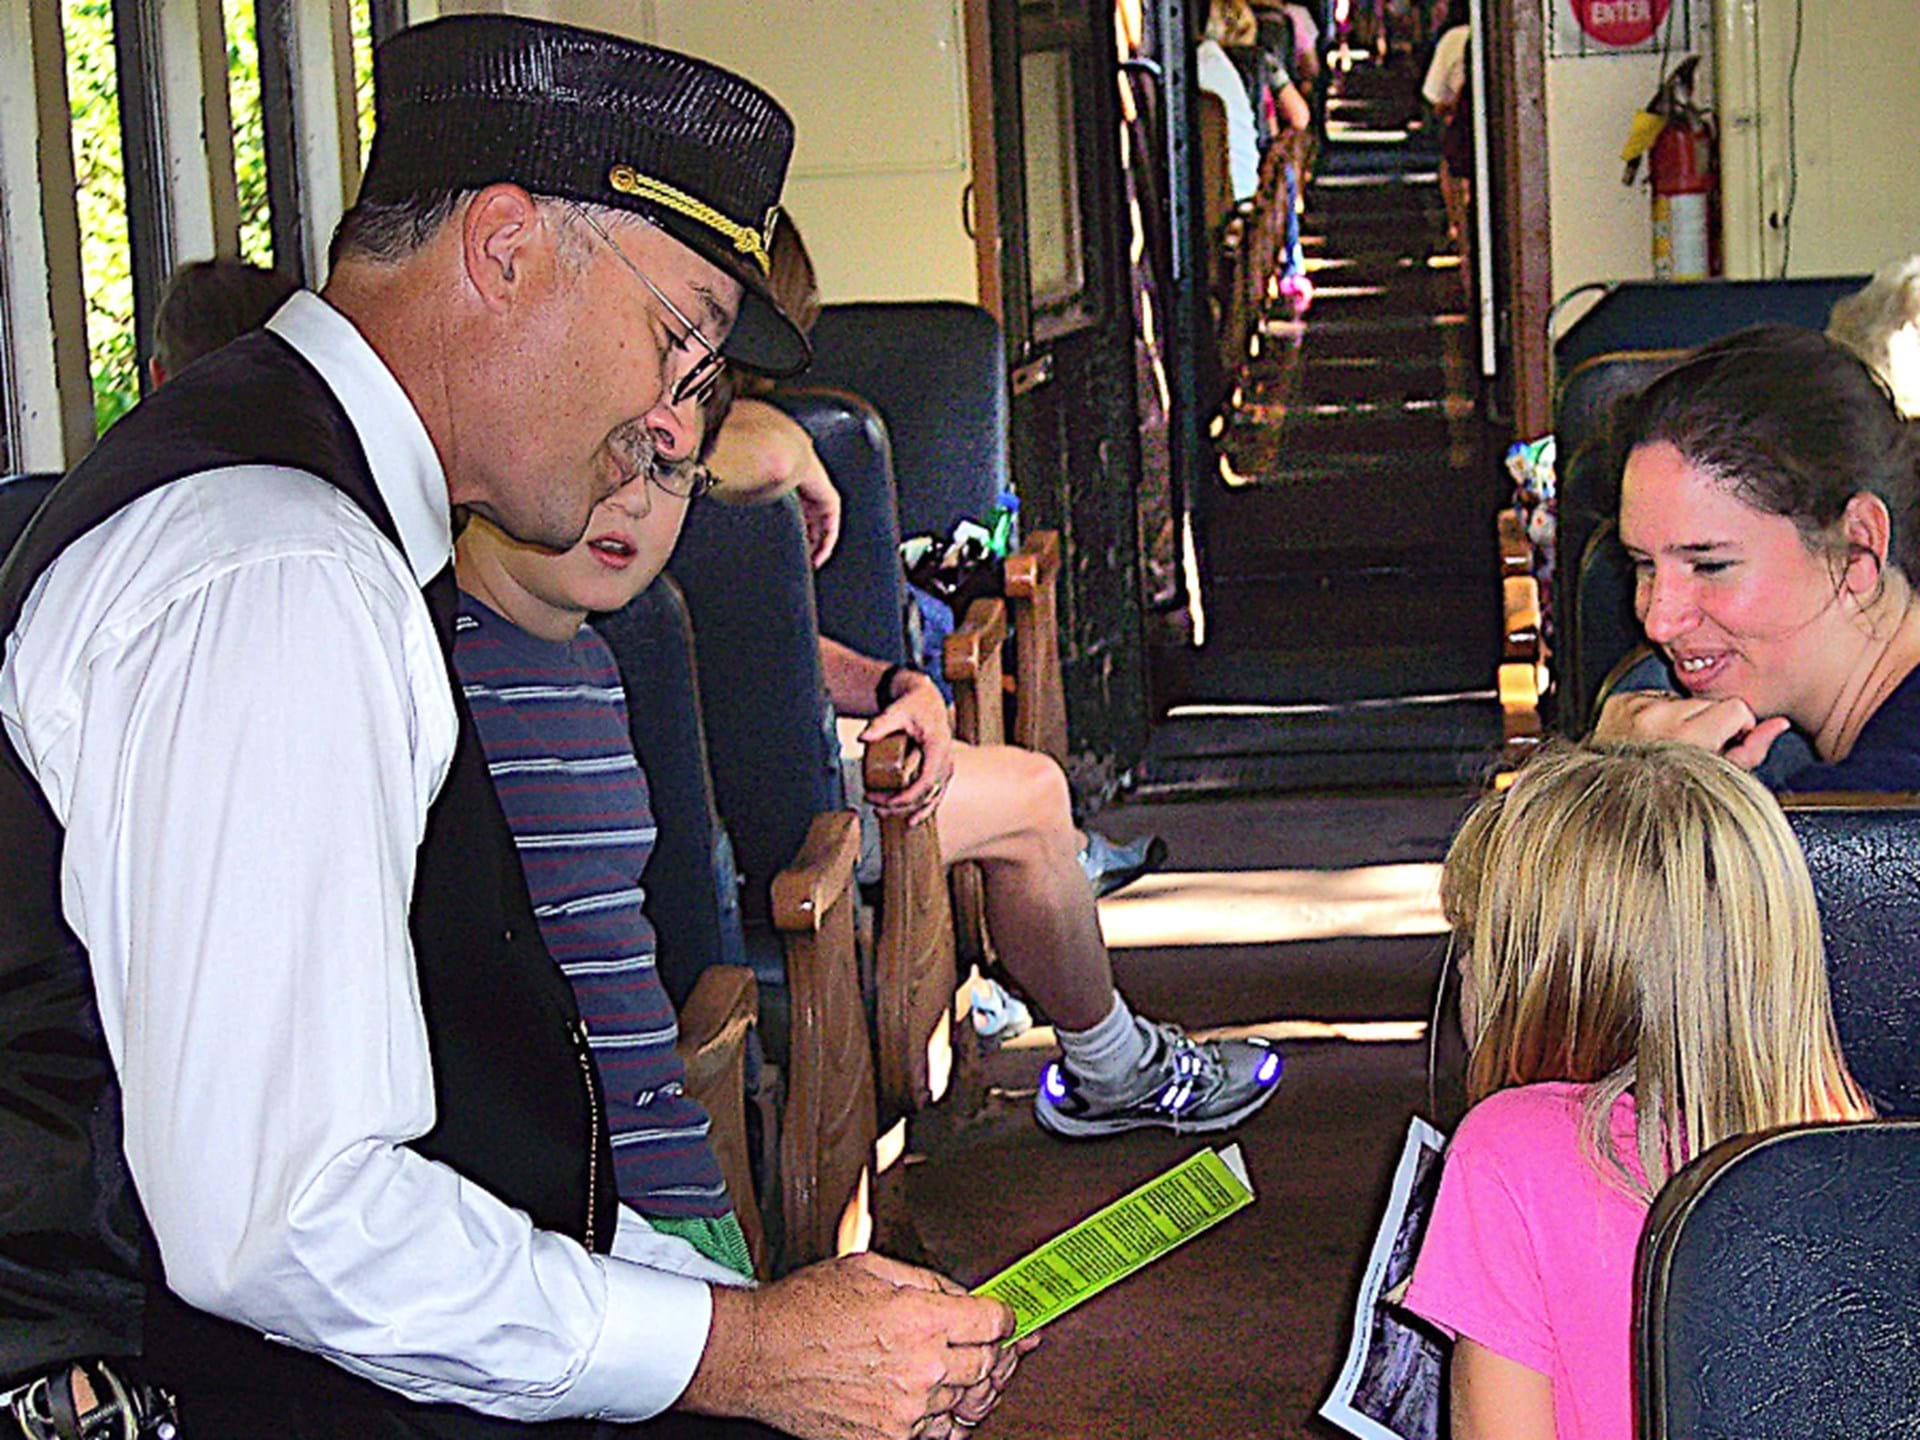 The Fraser Train conductor stops to chat with passengers